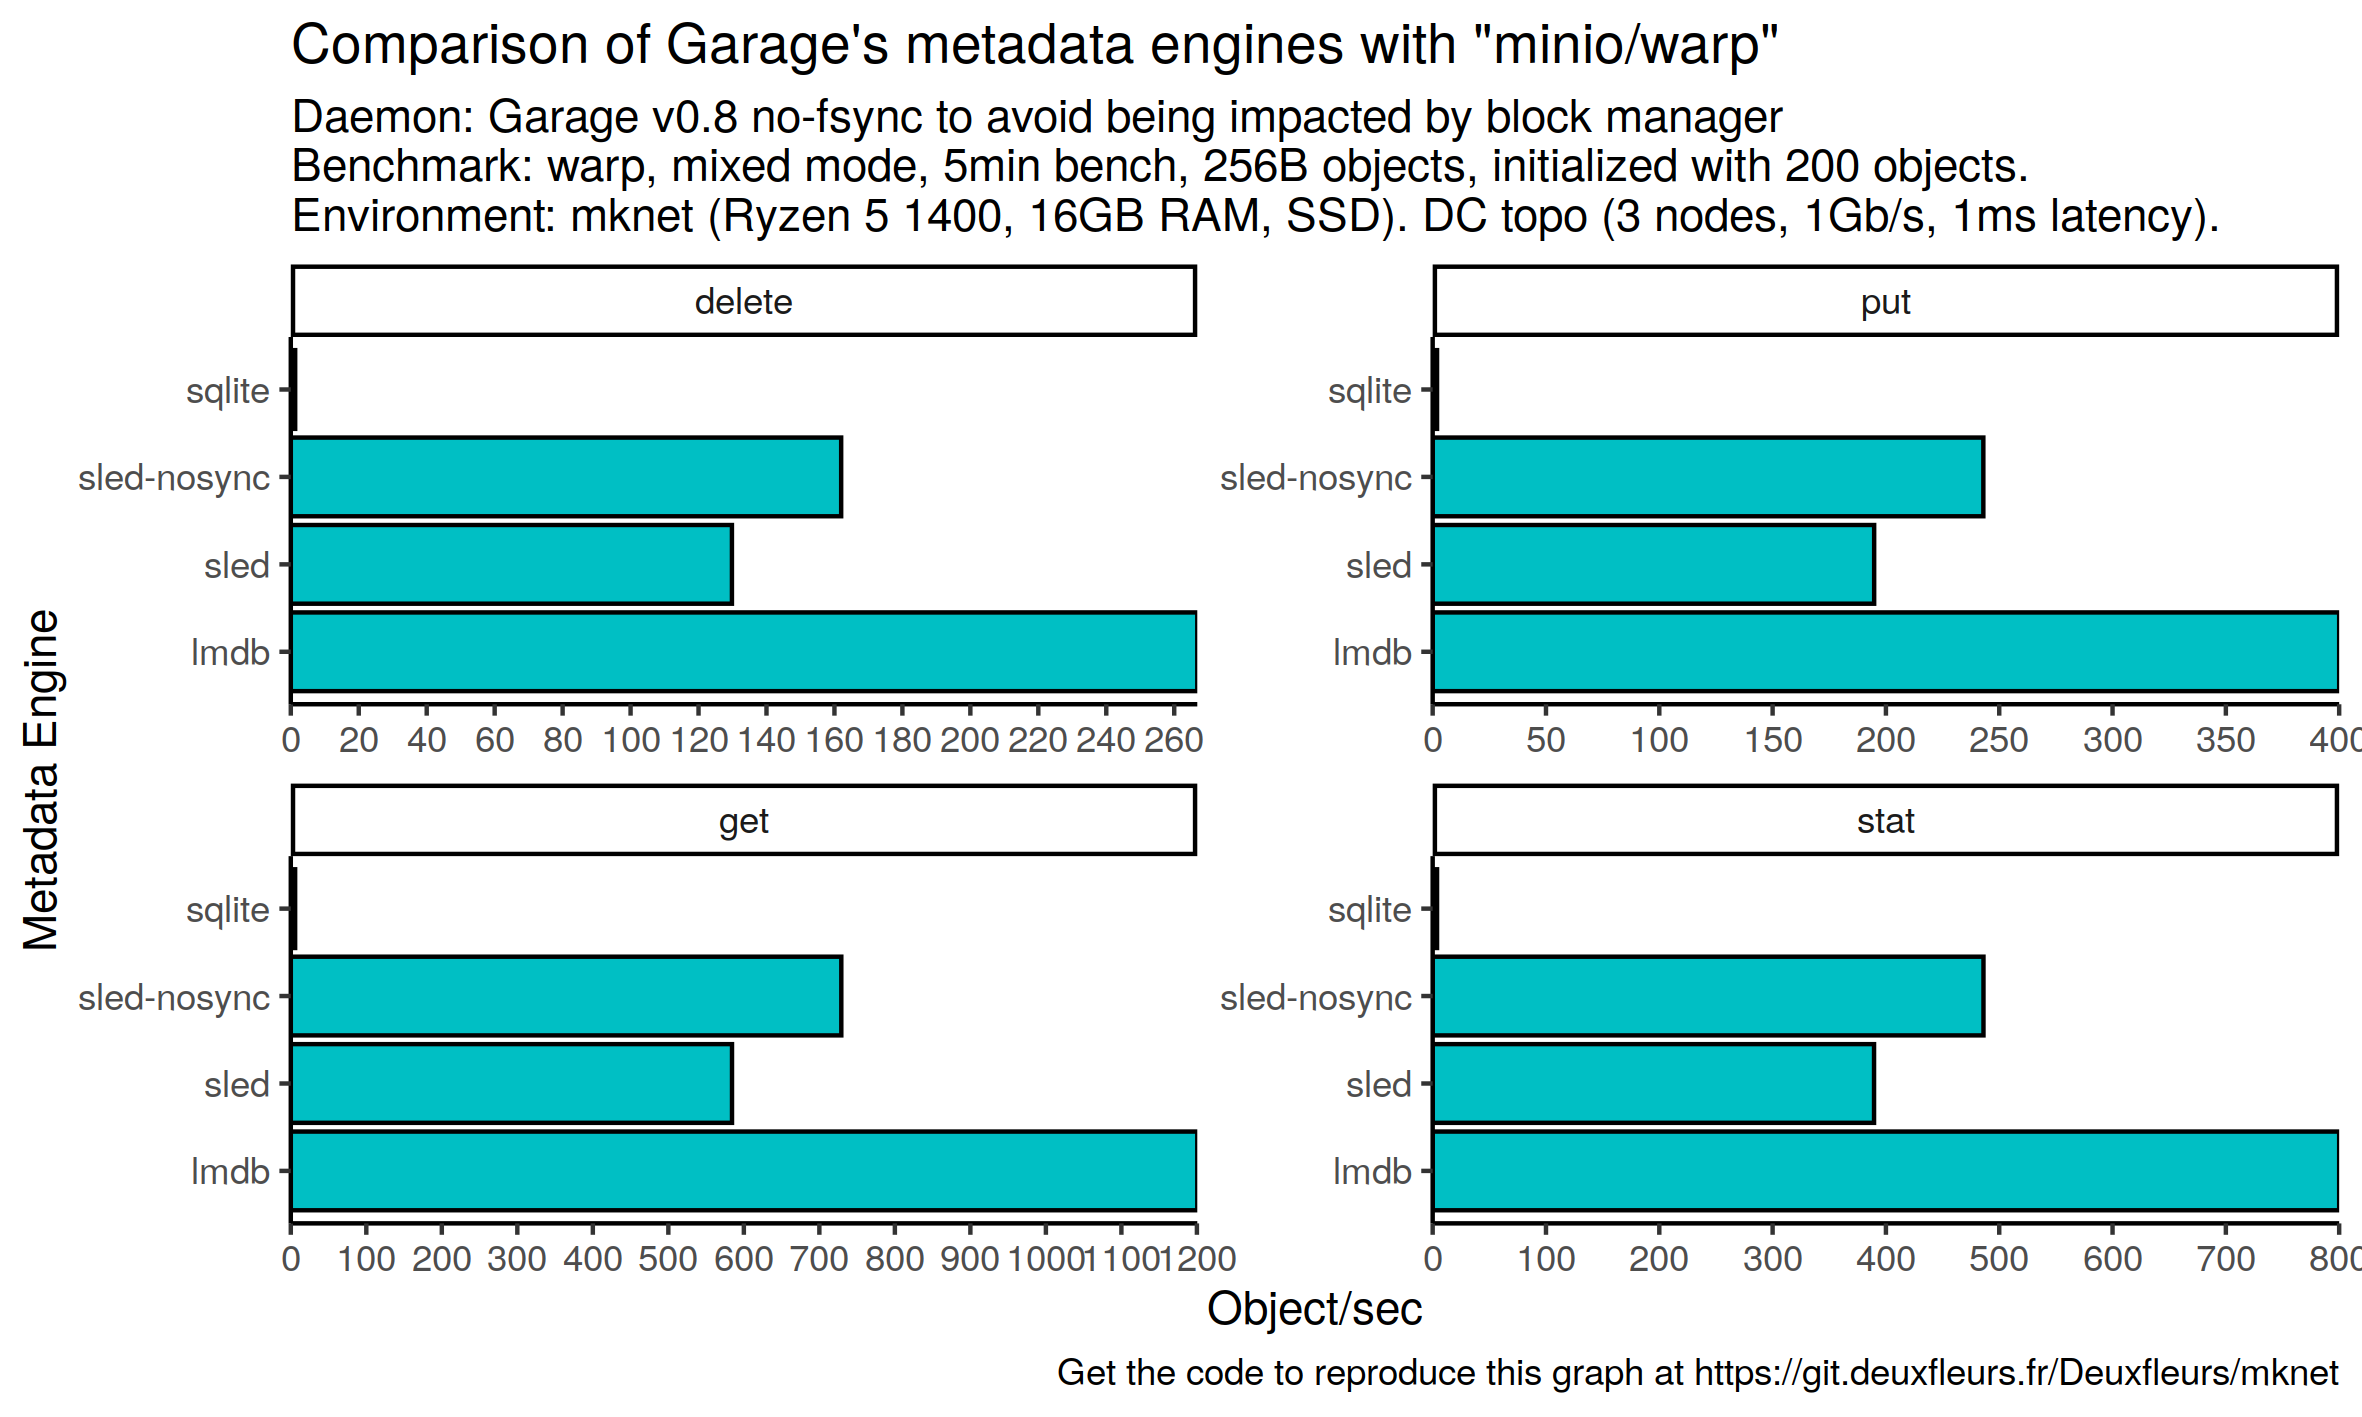 Plot of our metadata engines comparison with Warp